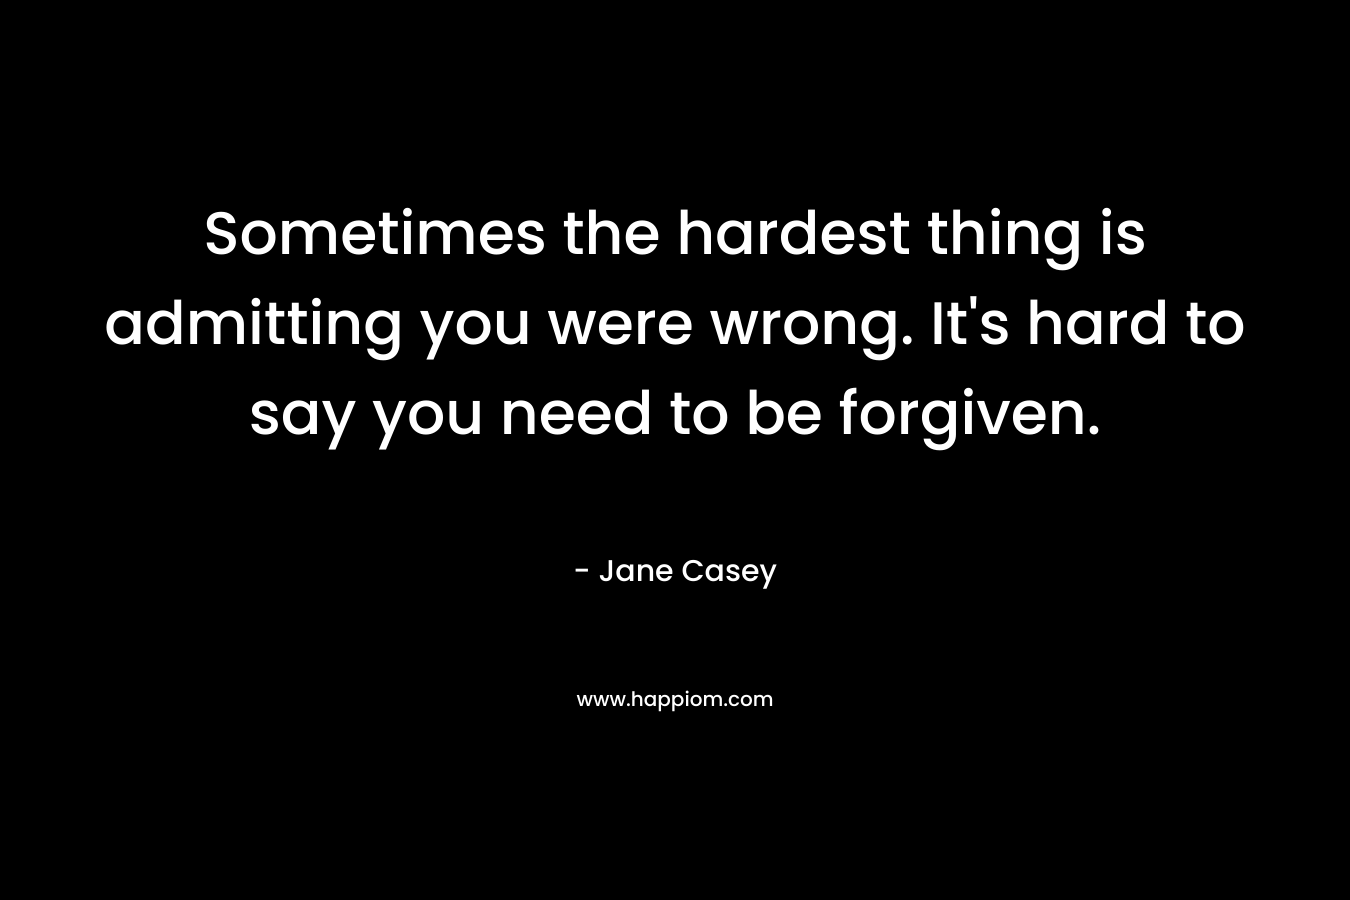 Sometimes the hardest thing is admitting you were wrong. It's hard to say you need to be forgiven.